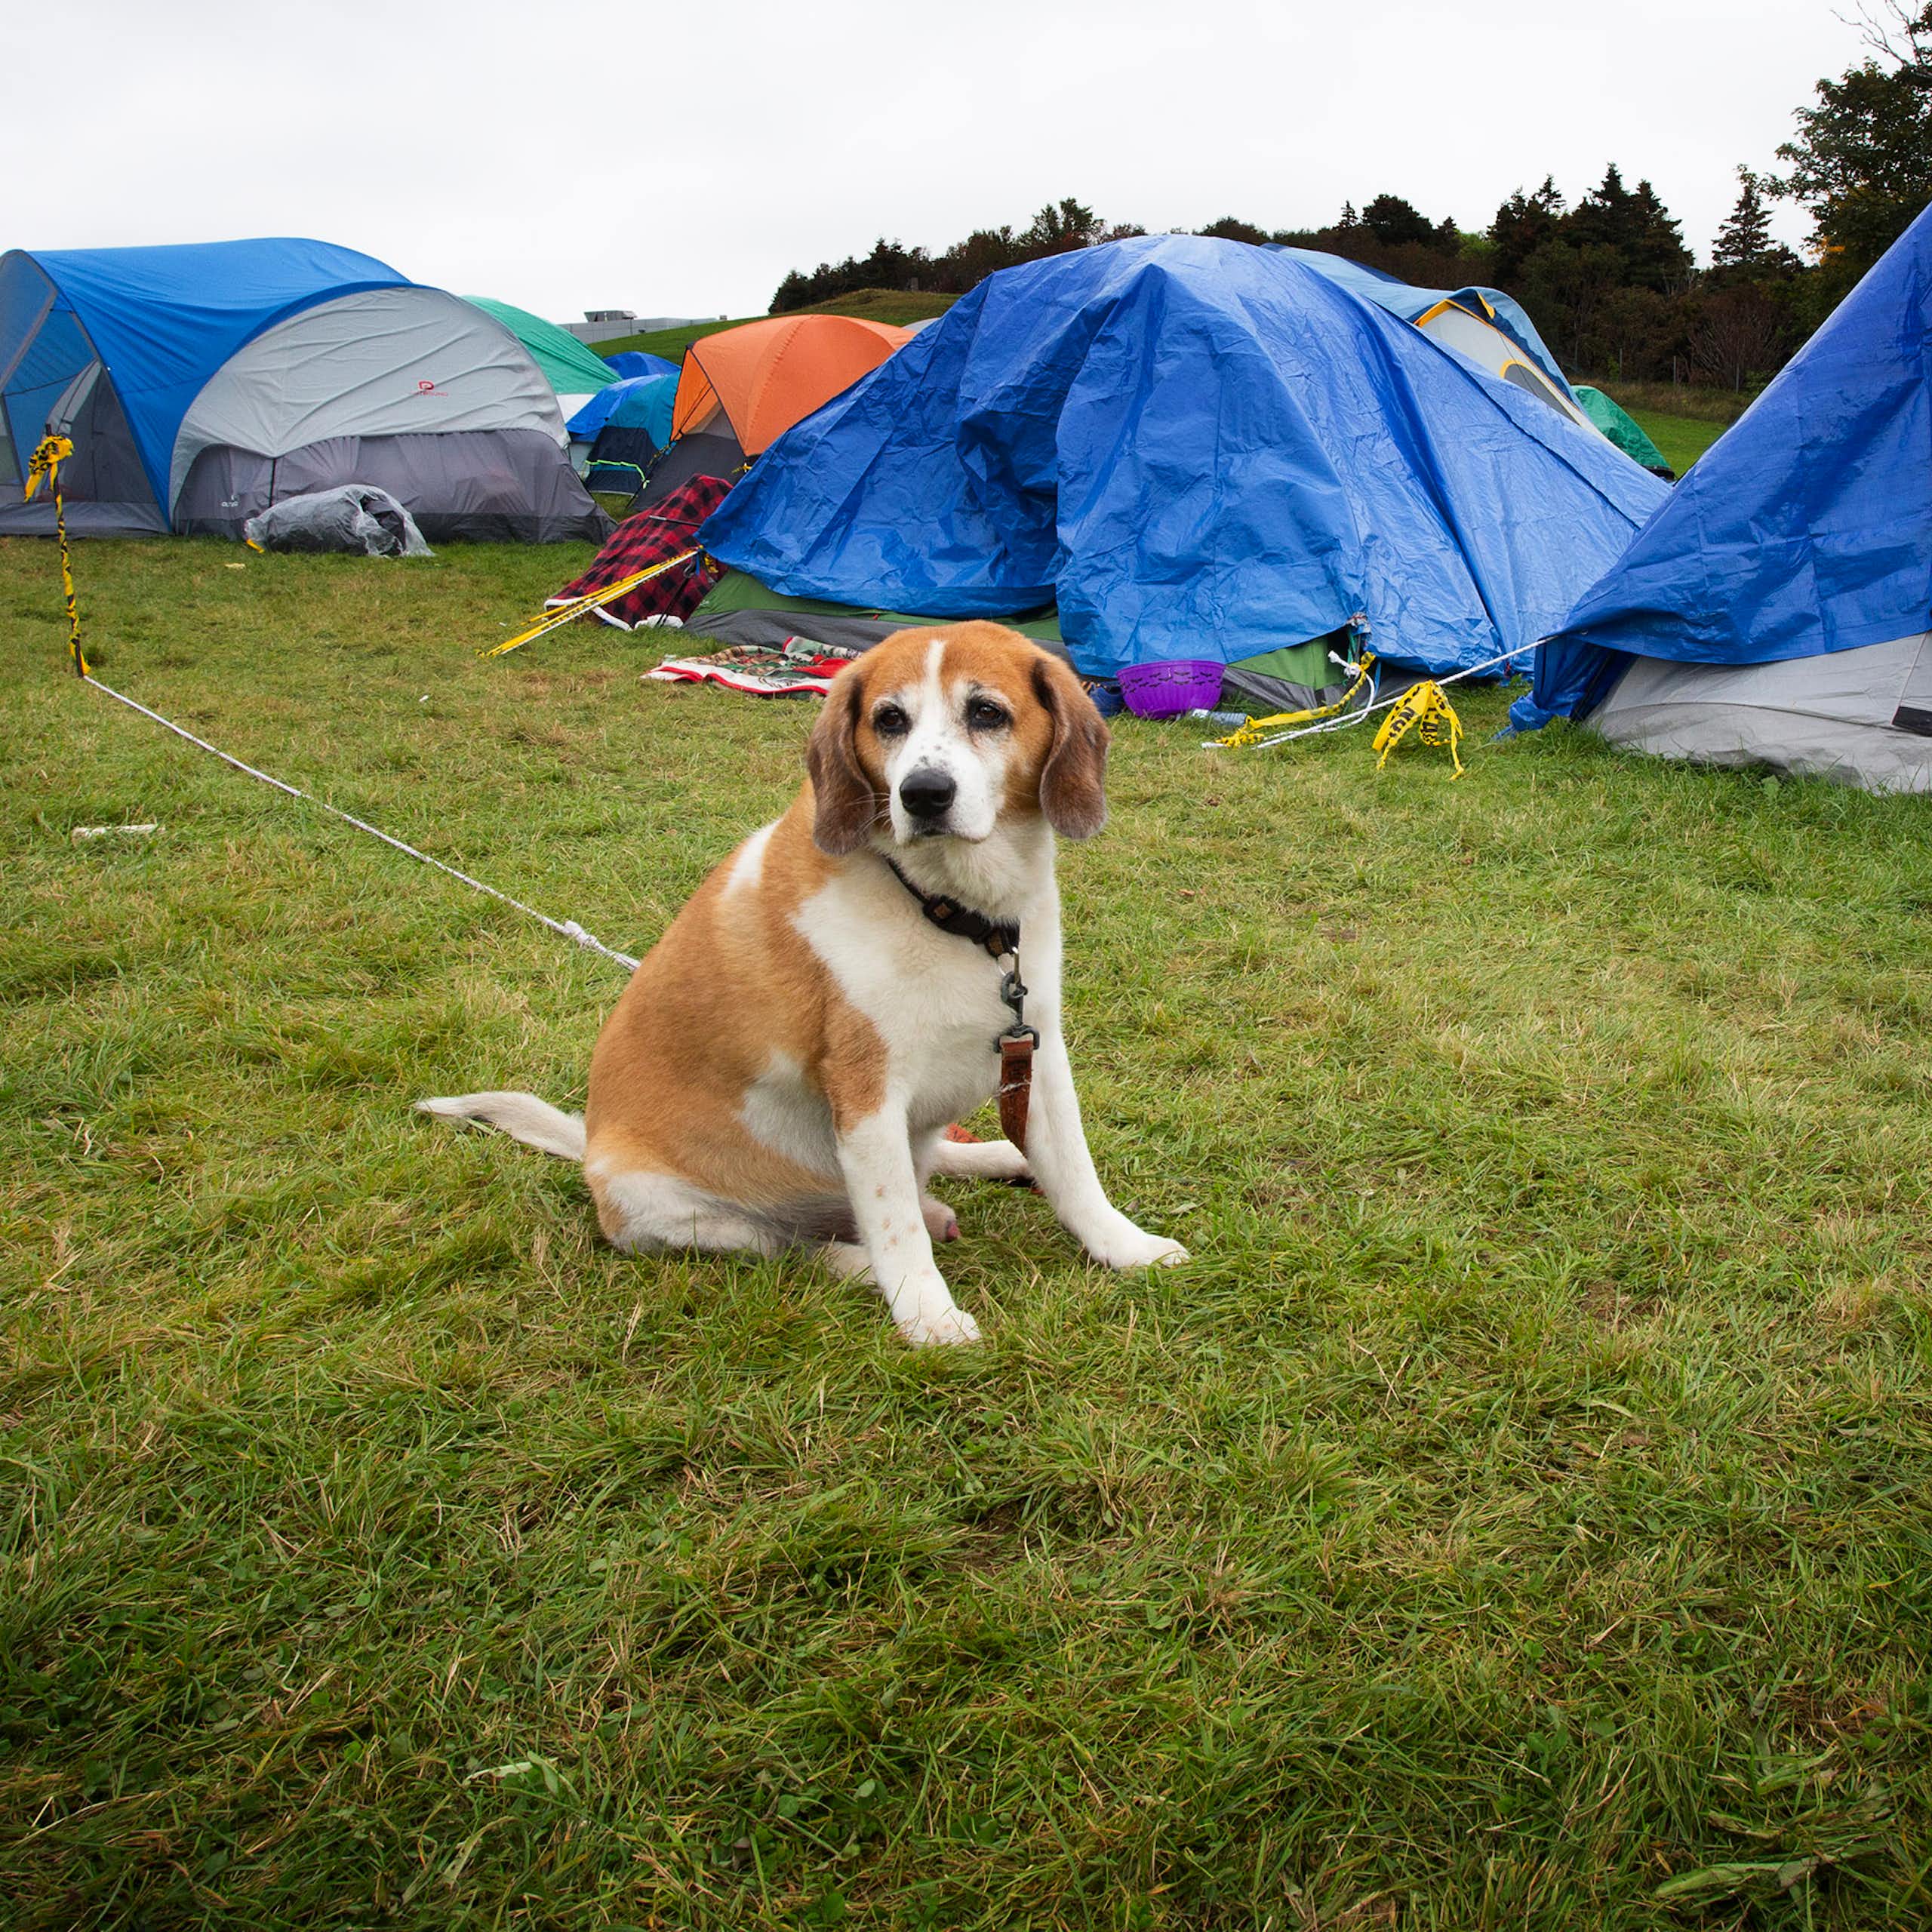 A dog sits in front of a row of tents on a grassy area.